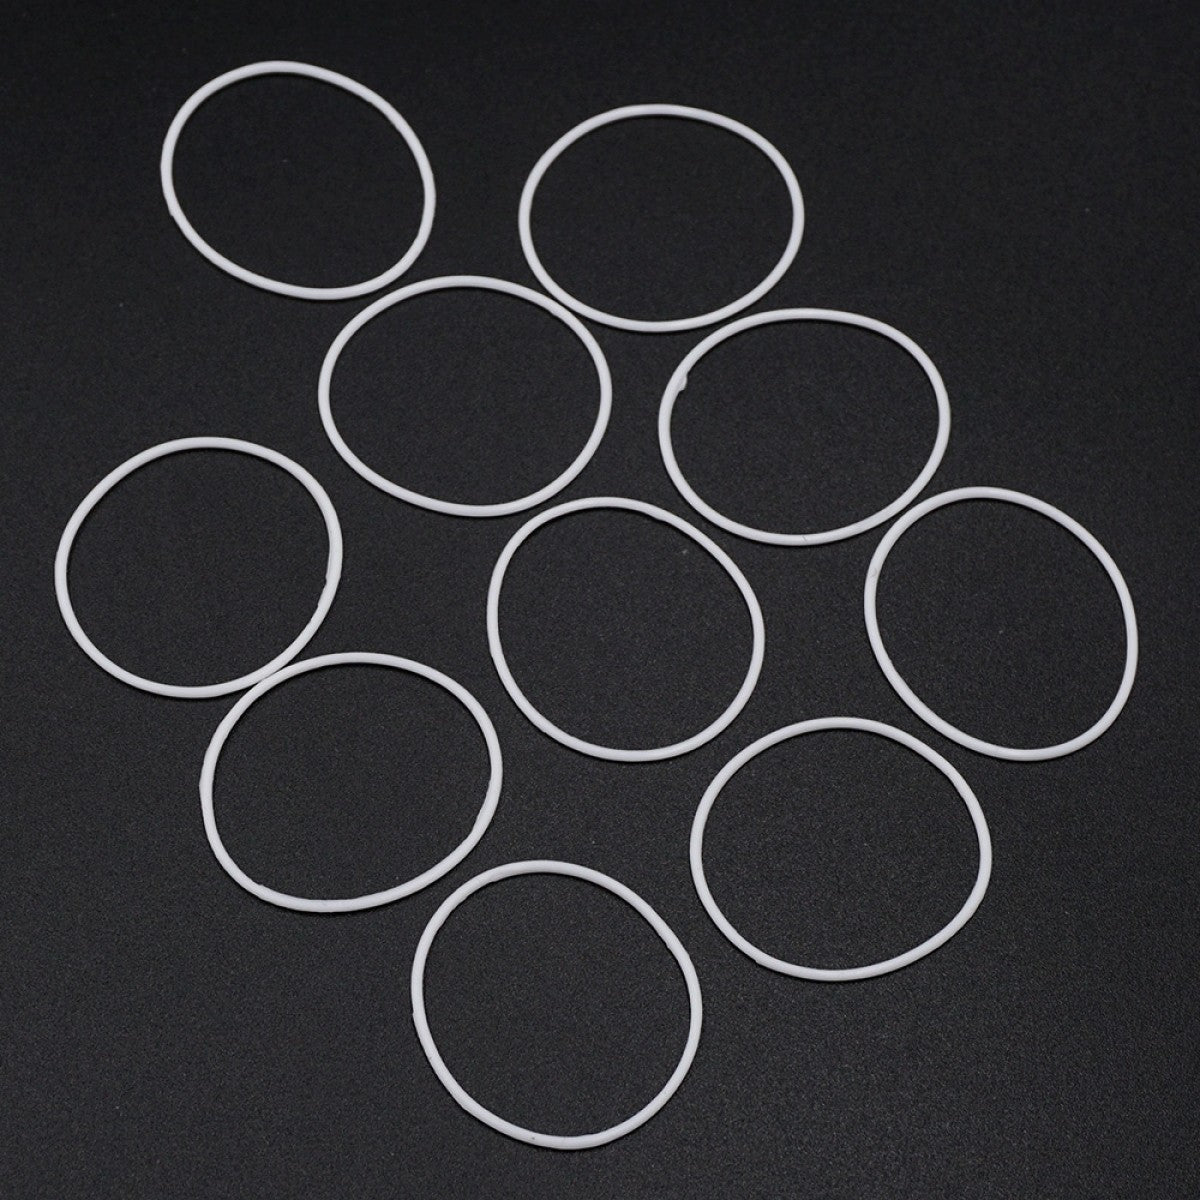 Xpress XP-10183 XQ Silicone Gear Differential O-RING 25x1mm 10pcs